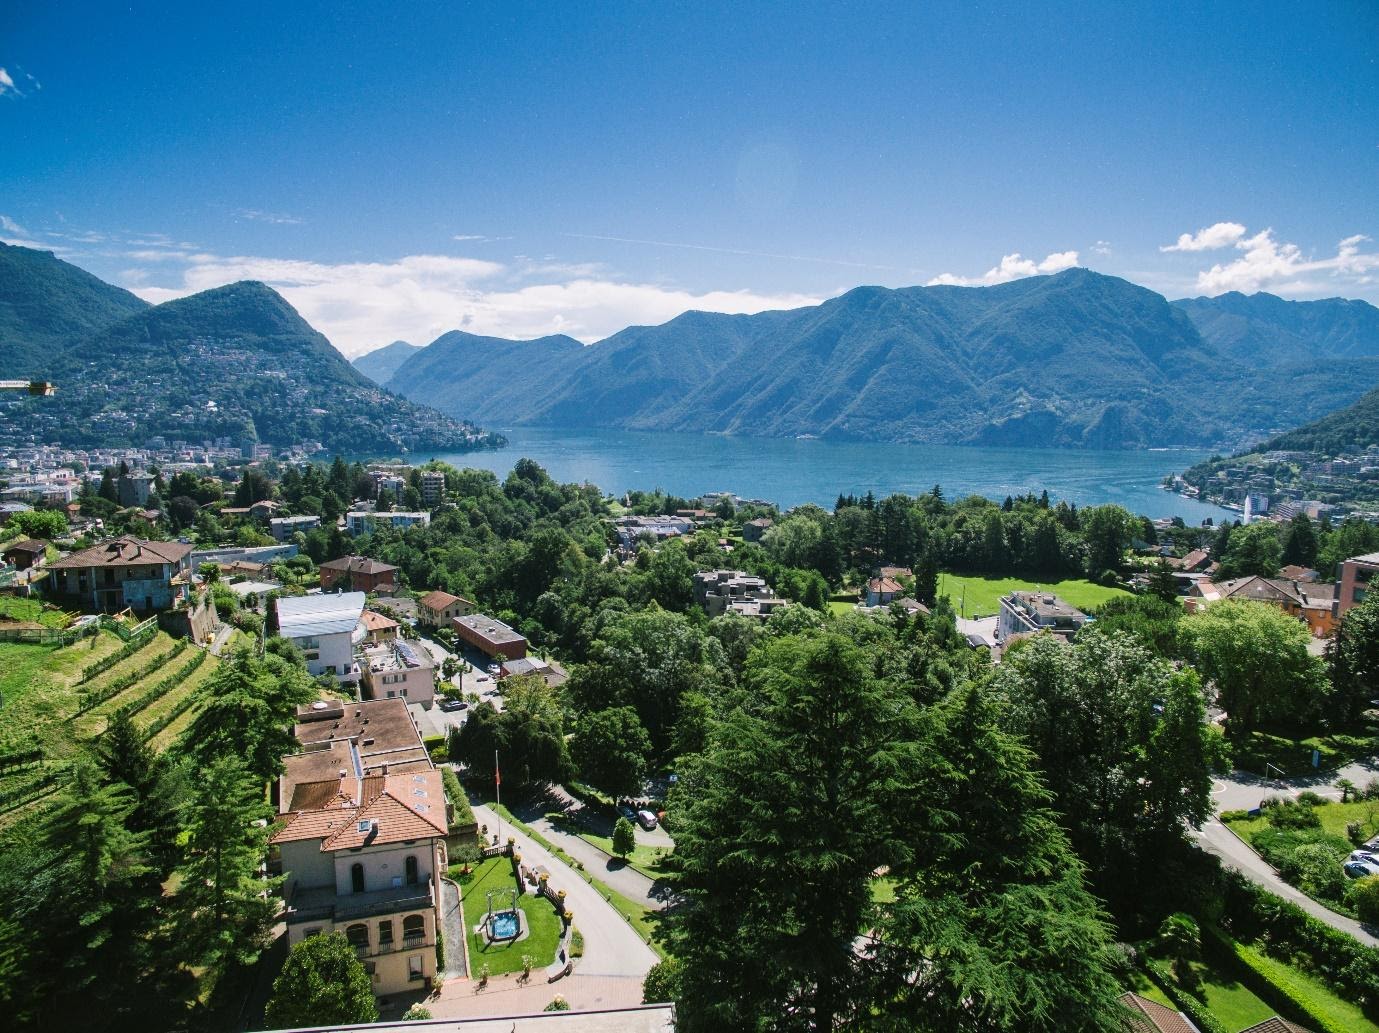 Swiss universities with programs in English